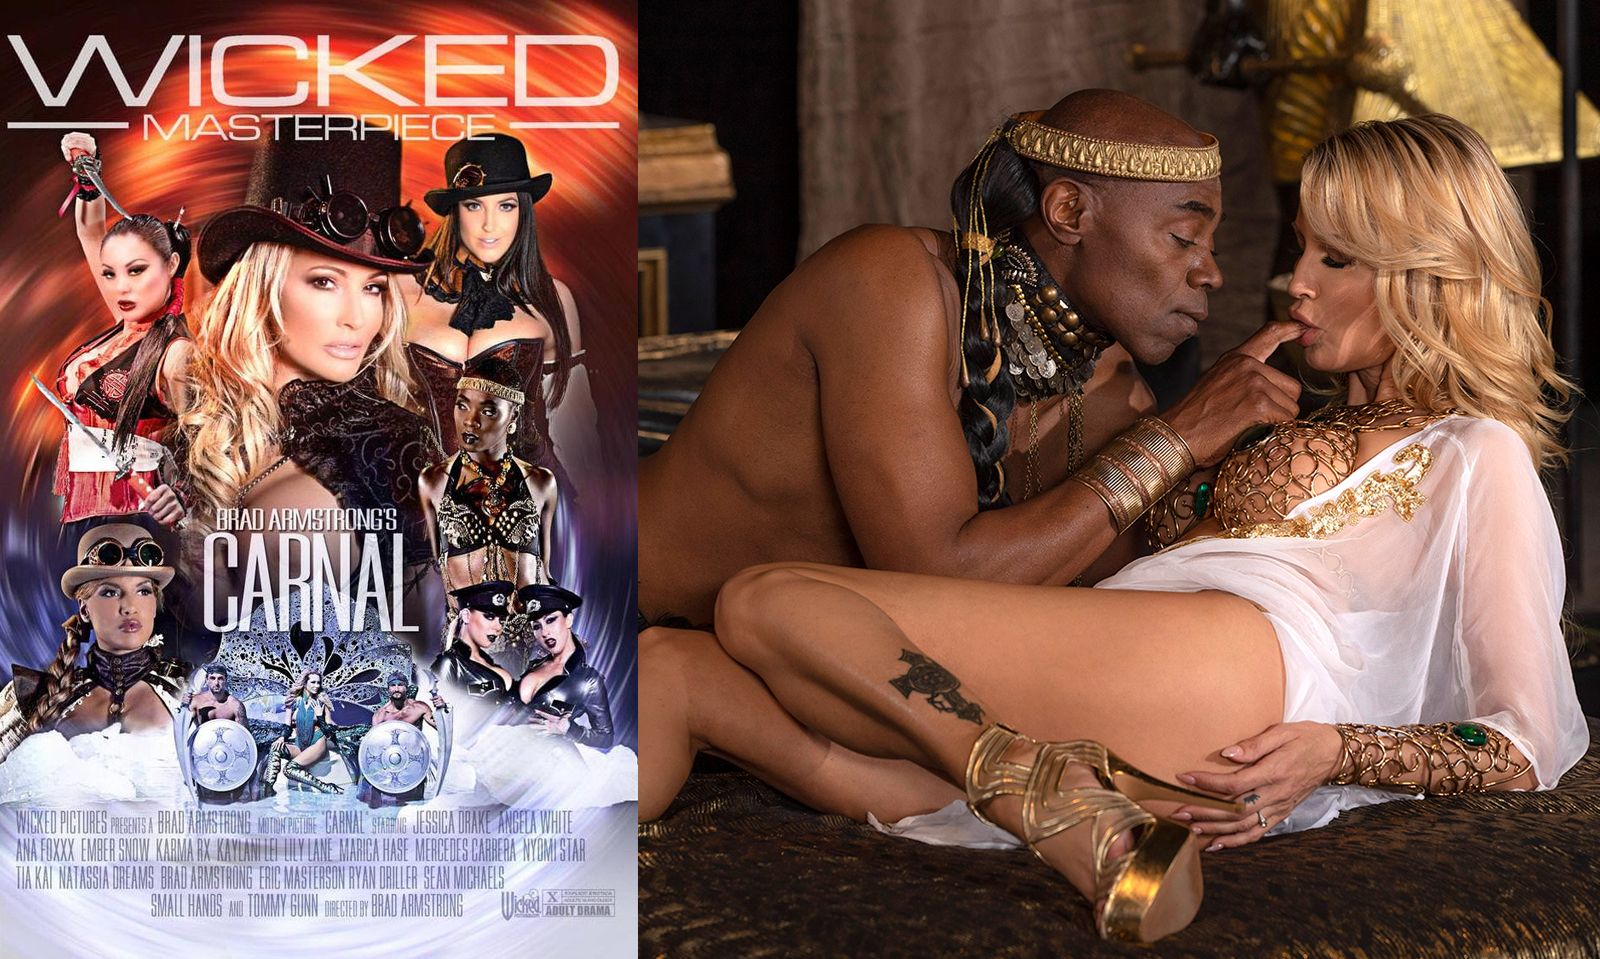 Wicked Launches Armstrong's 'Carnal' With Social Media Campaign | AVN